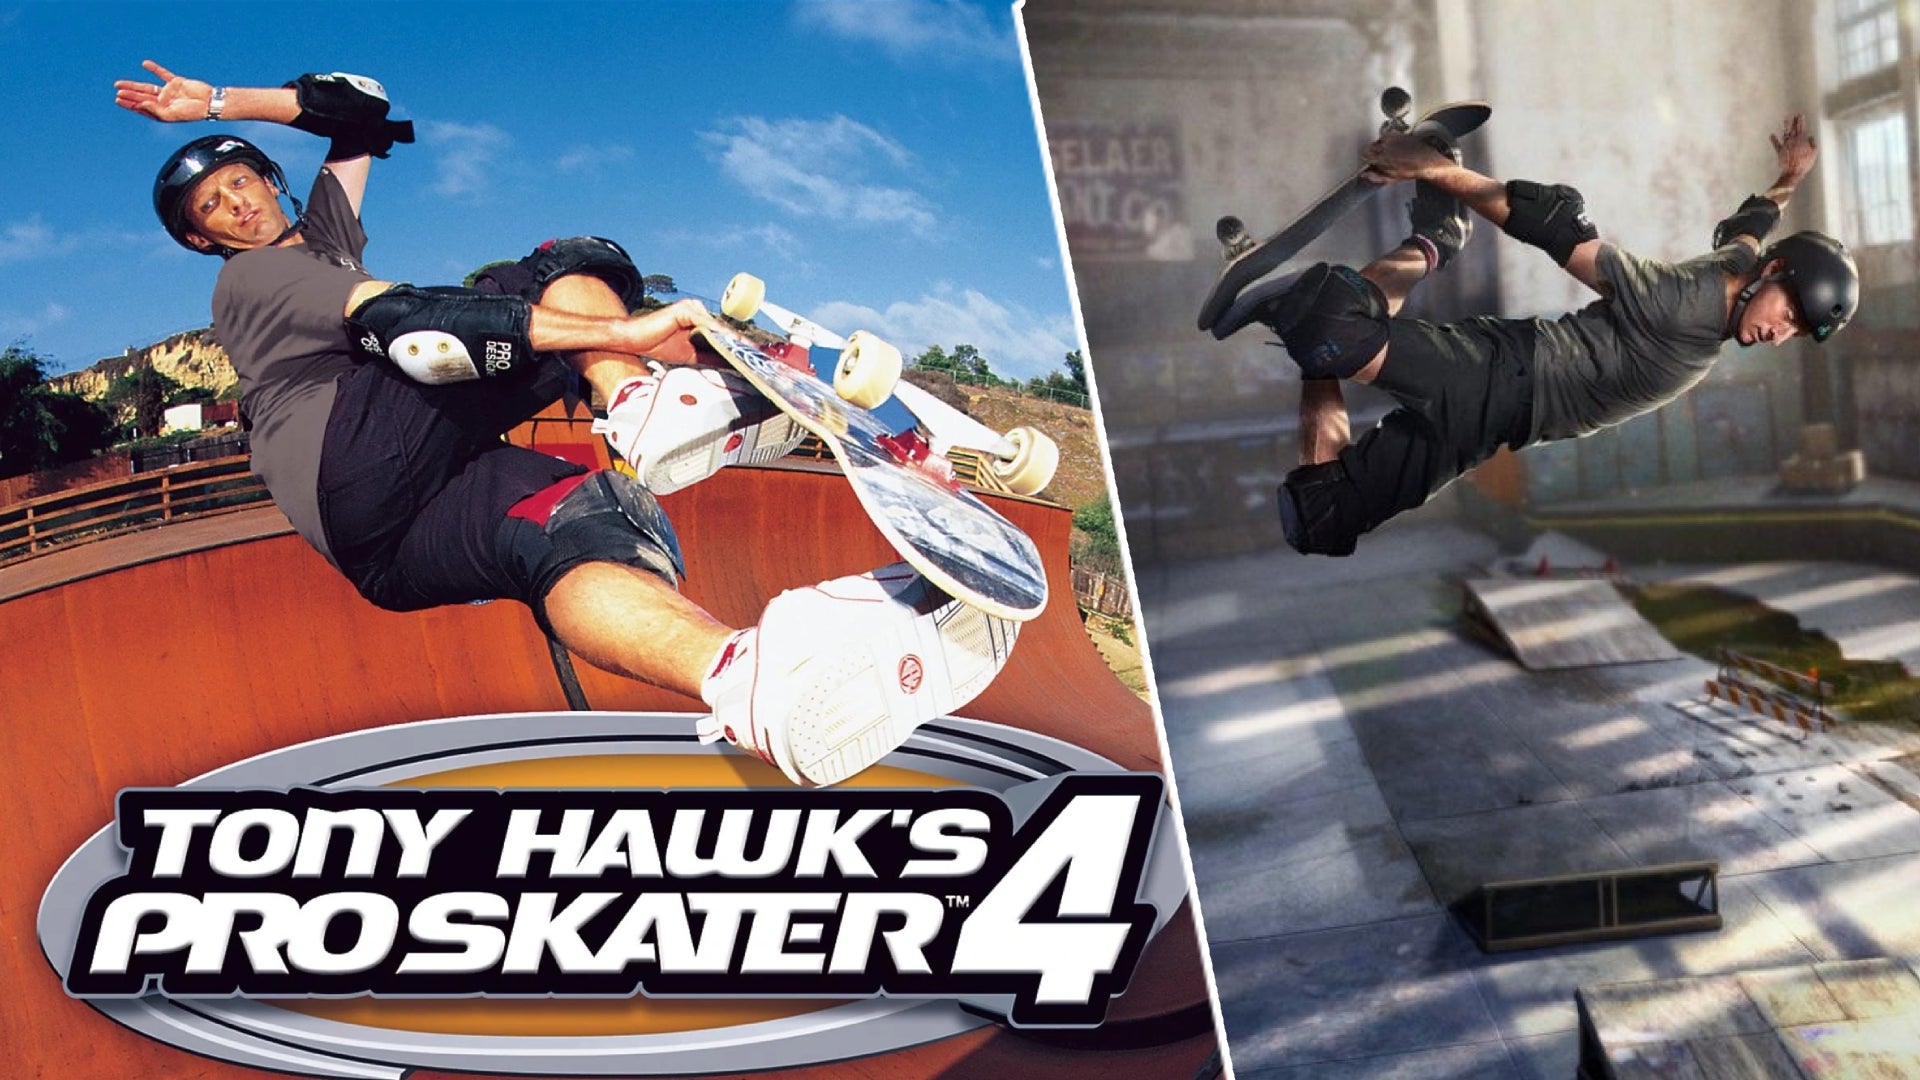 Image for Tony Hawk's Pro Skater 3 + 4 Remasters canned by Activision after Vicarious Visions merger